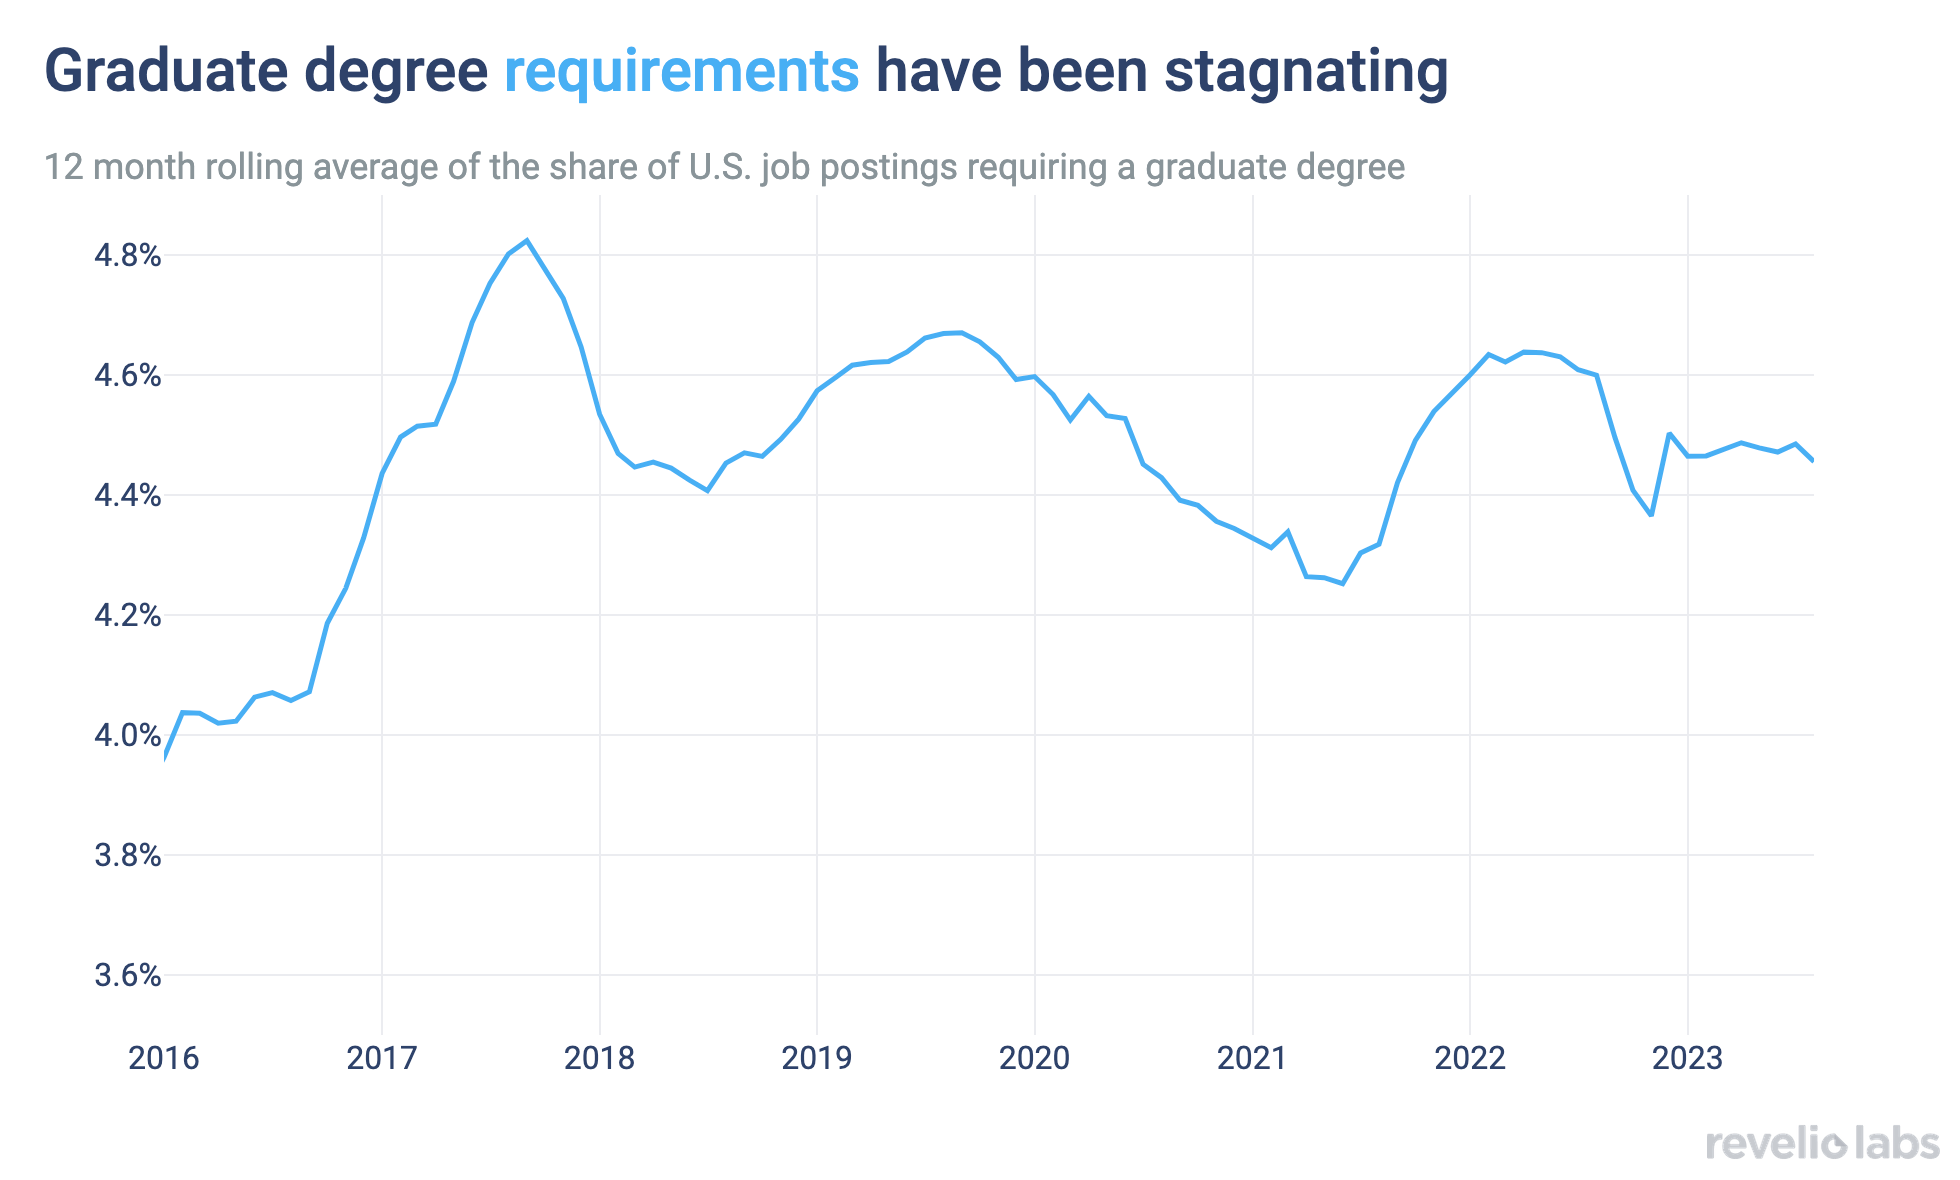 Graduate degree requirements have been stagnating